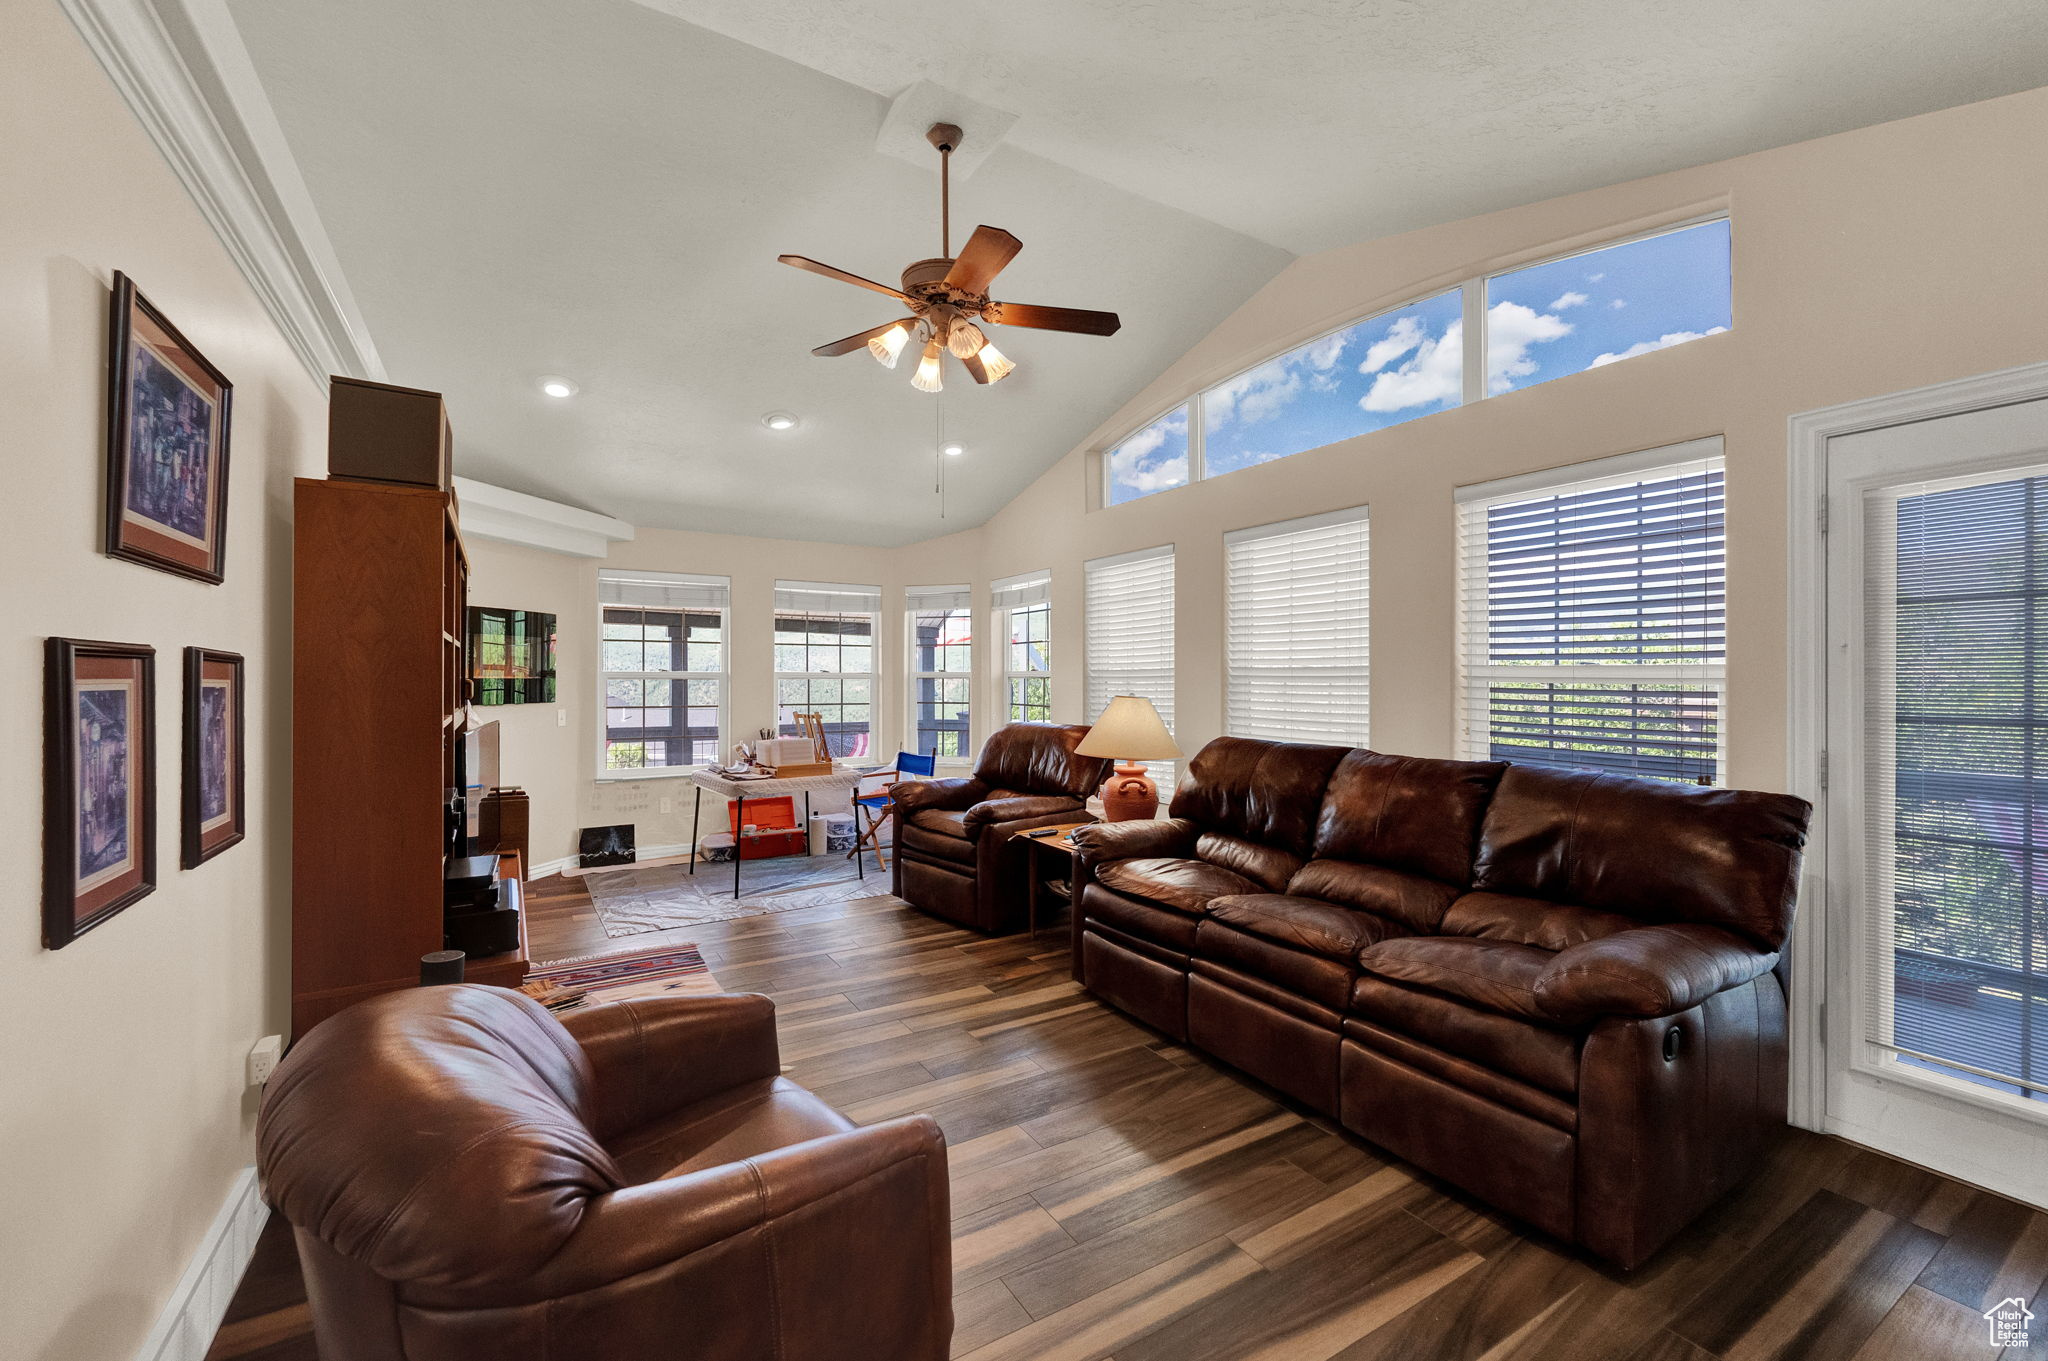 Living room featuring plenty of natural light, dark hardwood / wood-style flooring, vaulted ceiling, and ceiling fan